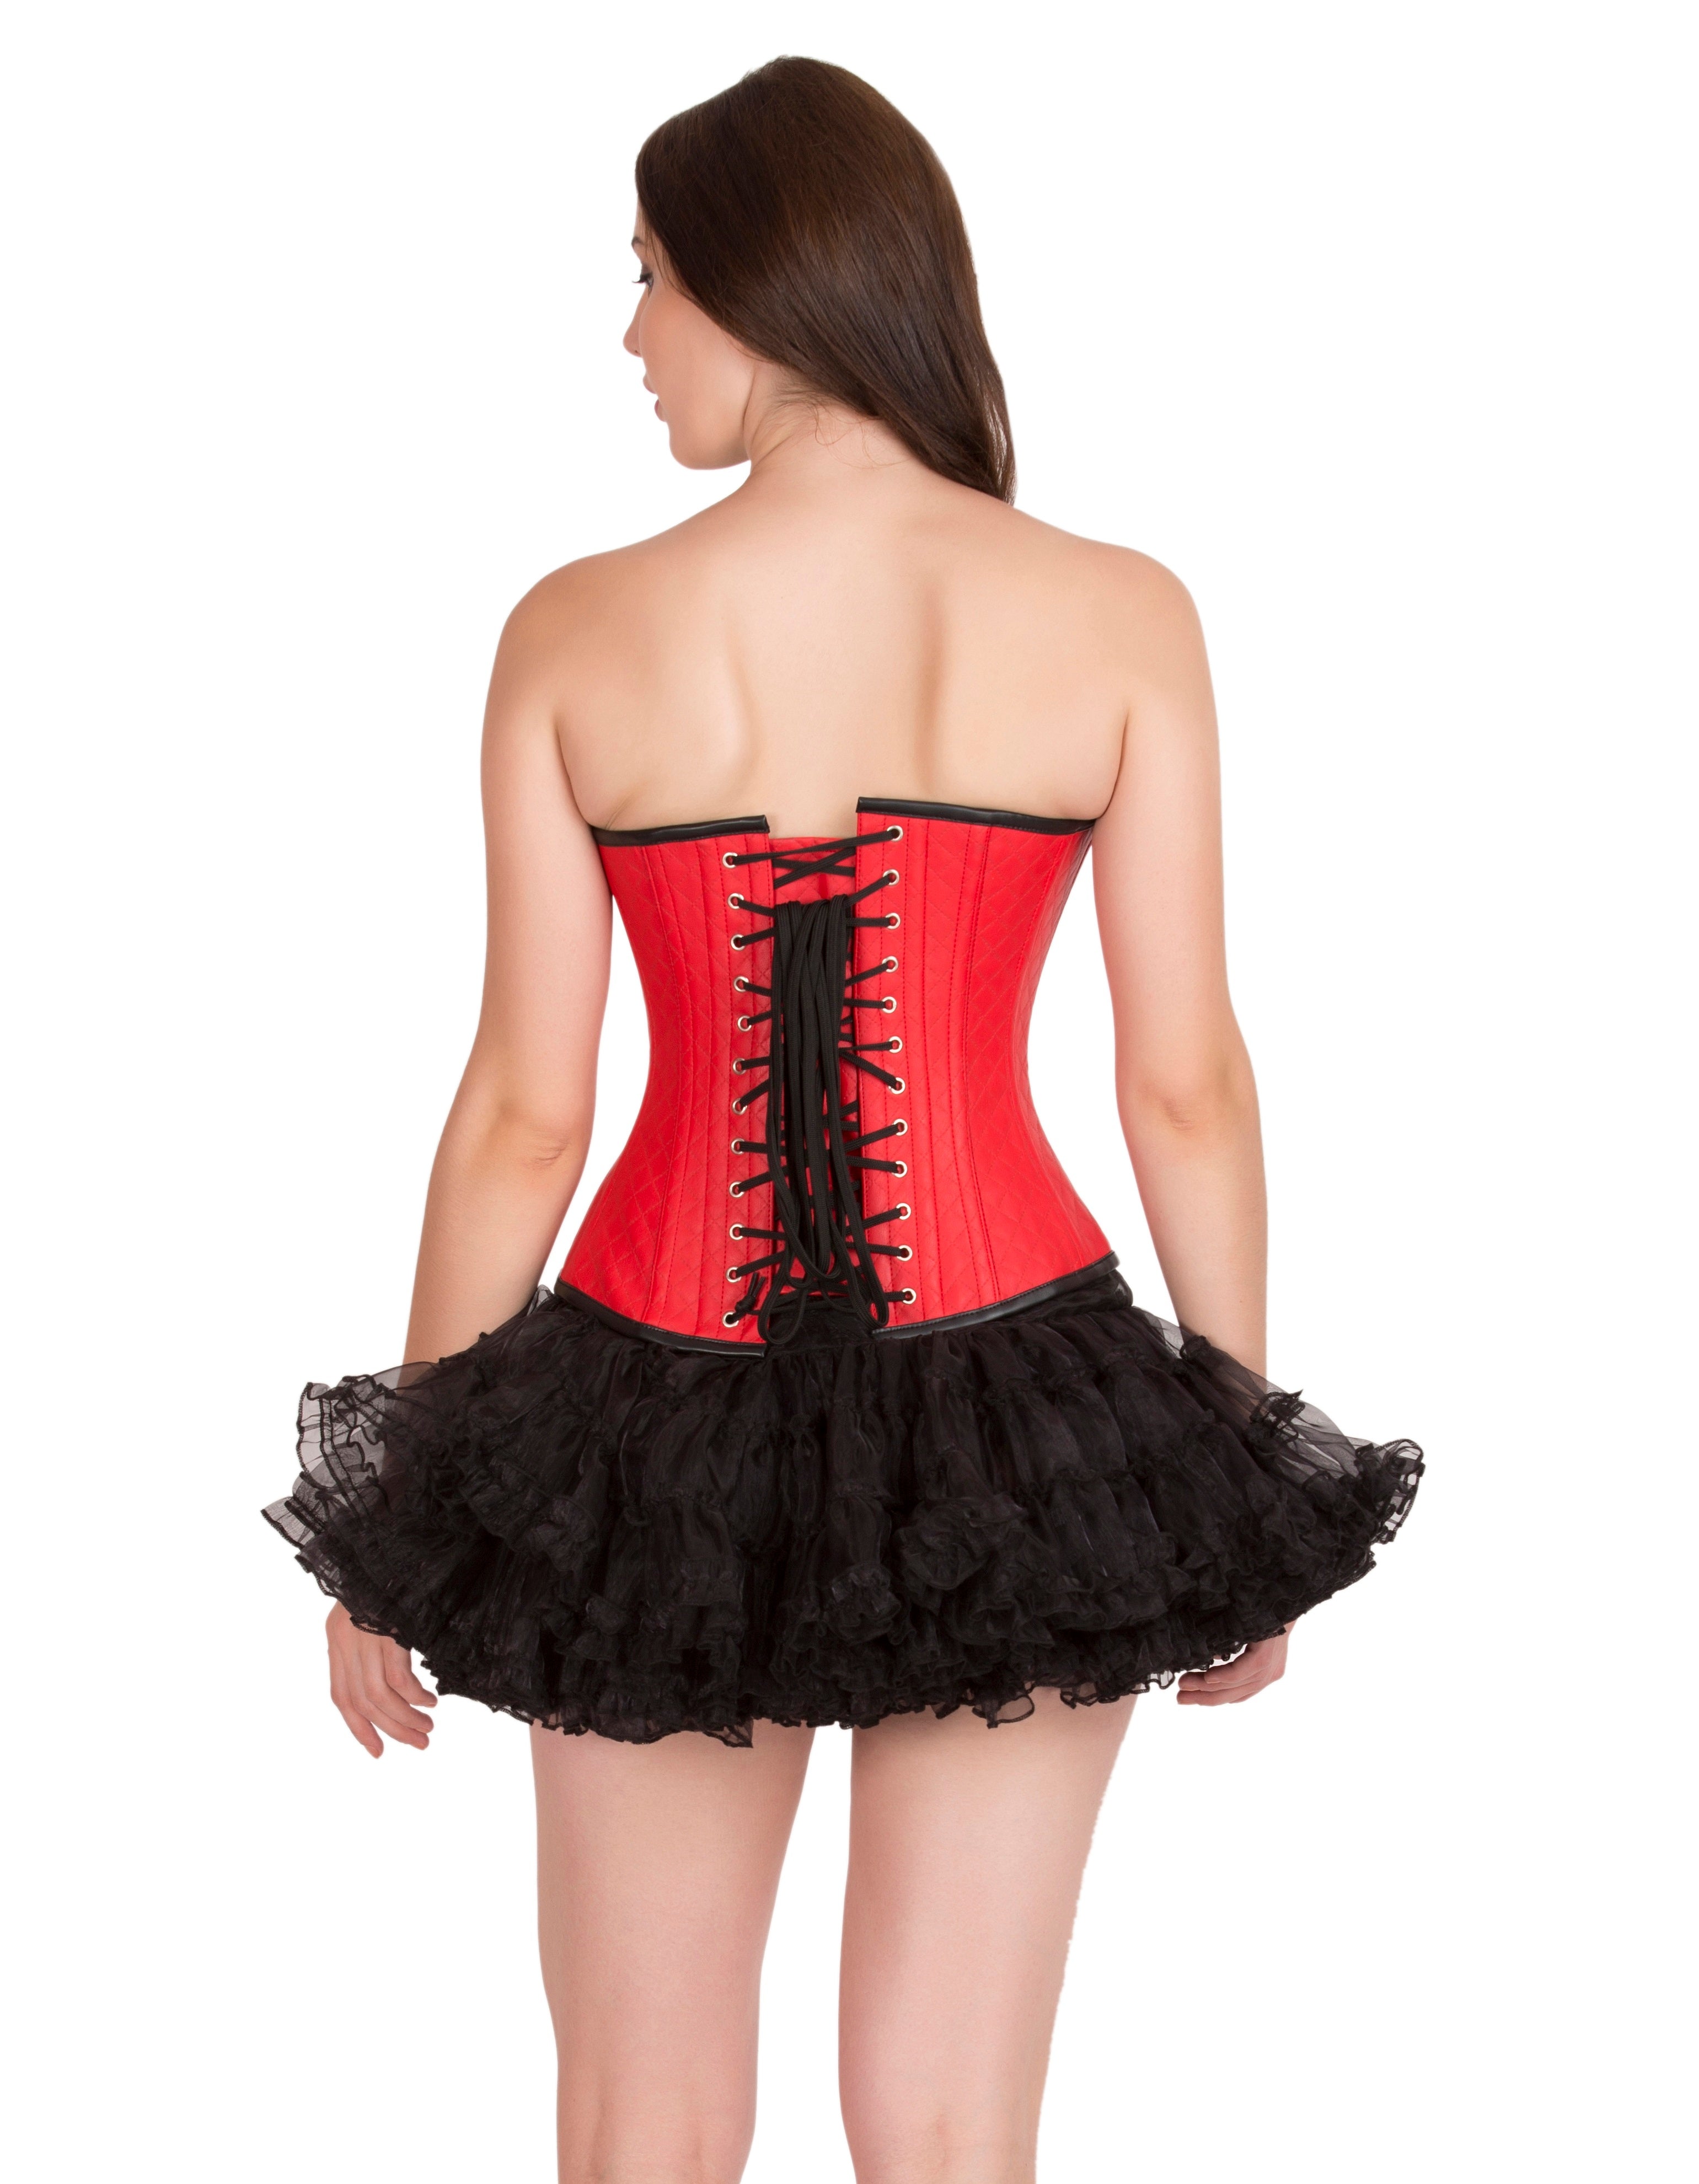 Red Black Leather Plus Size Overbust Corset with Tutu Skirt – CorsetsNmore